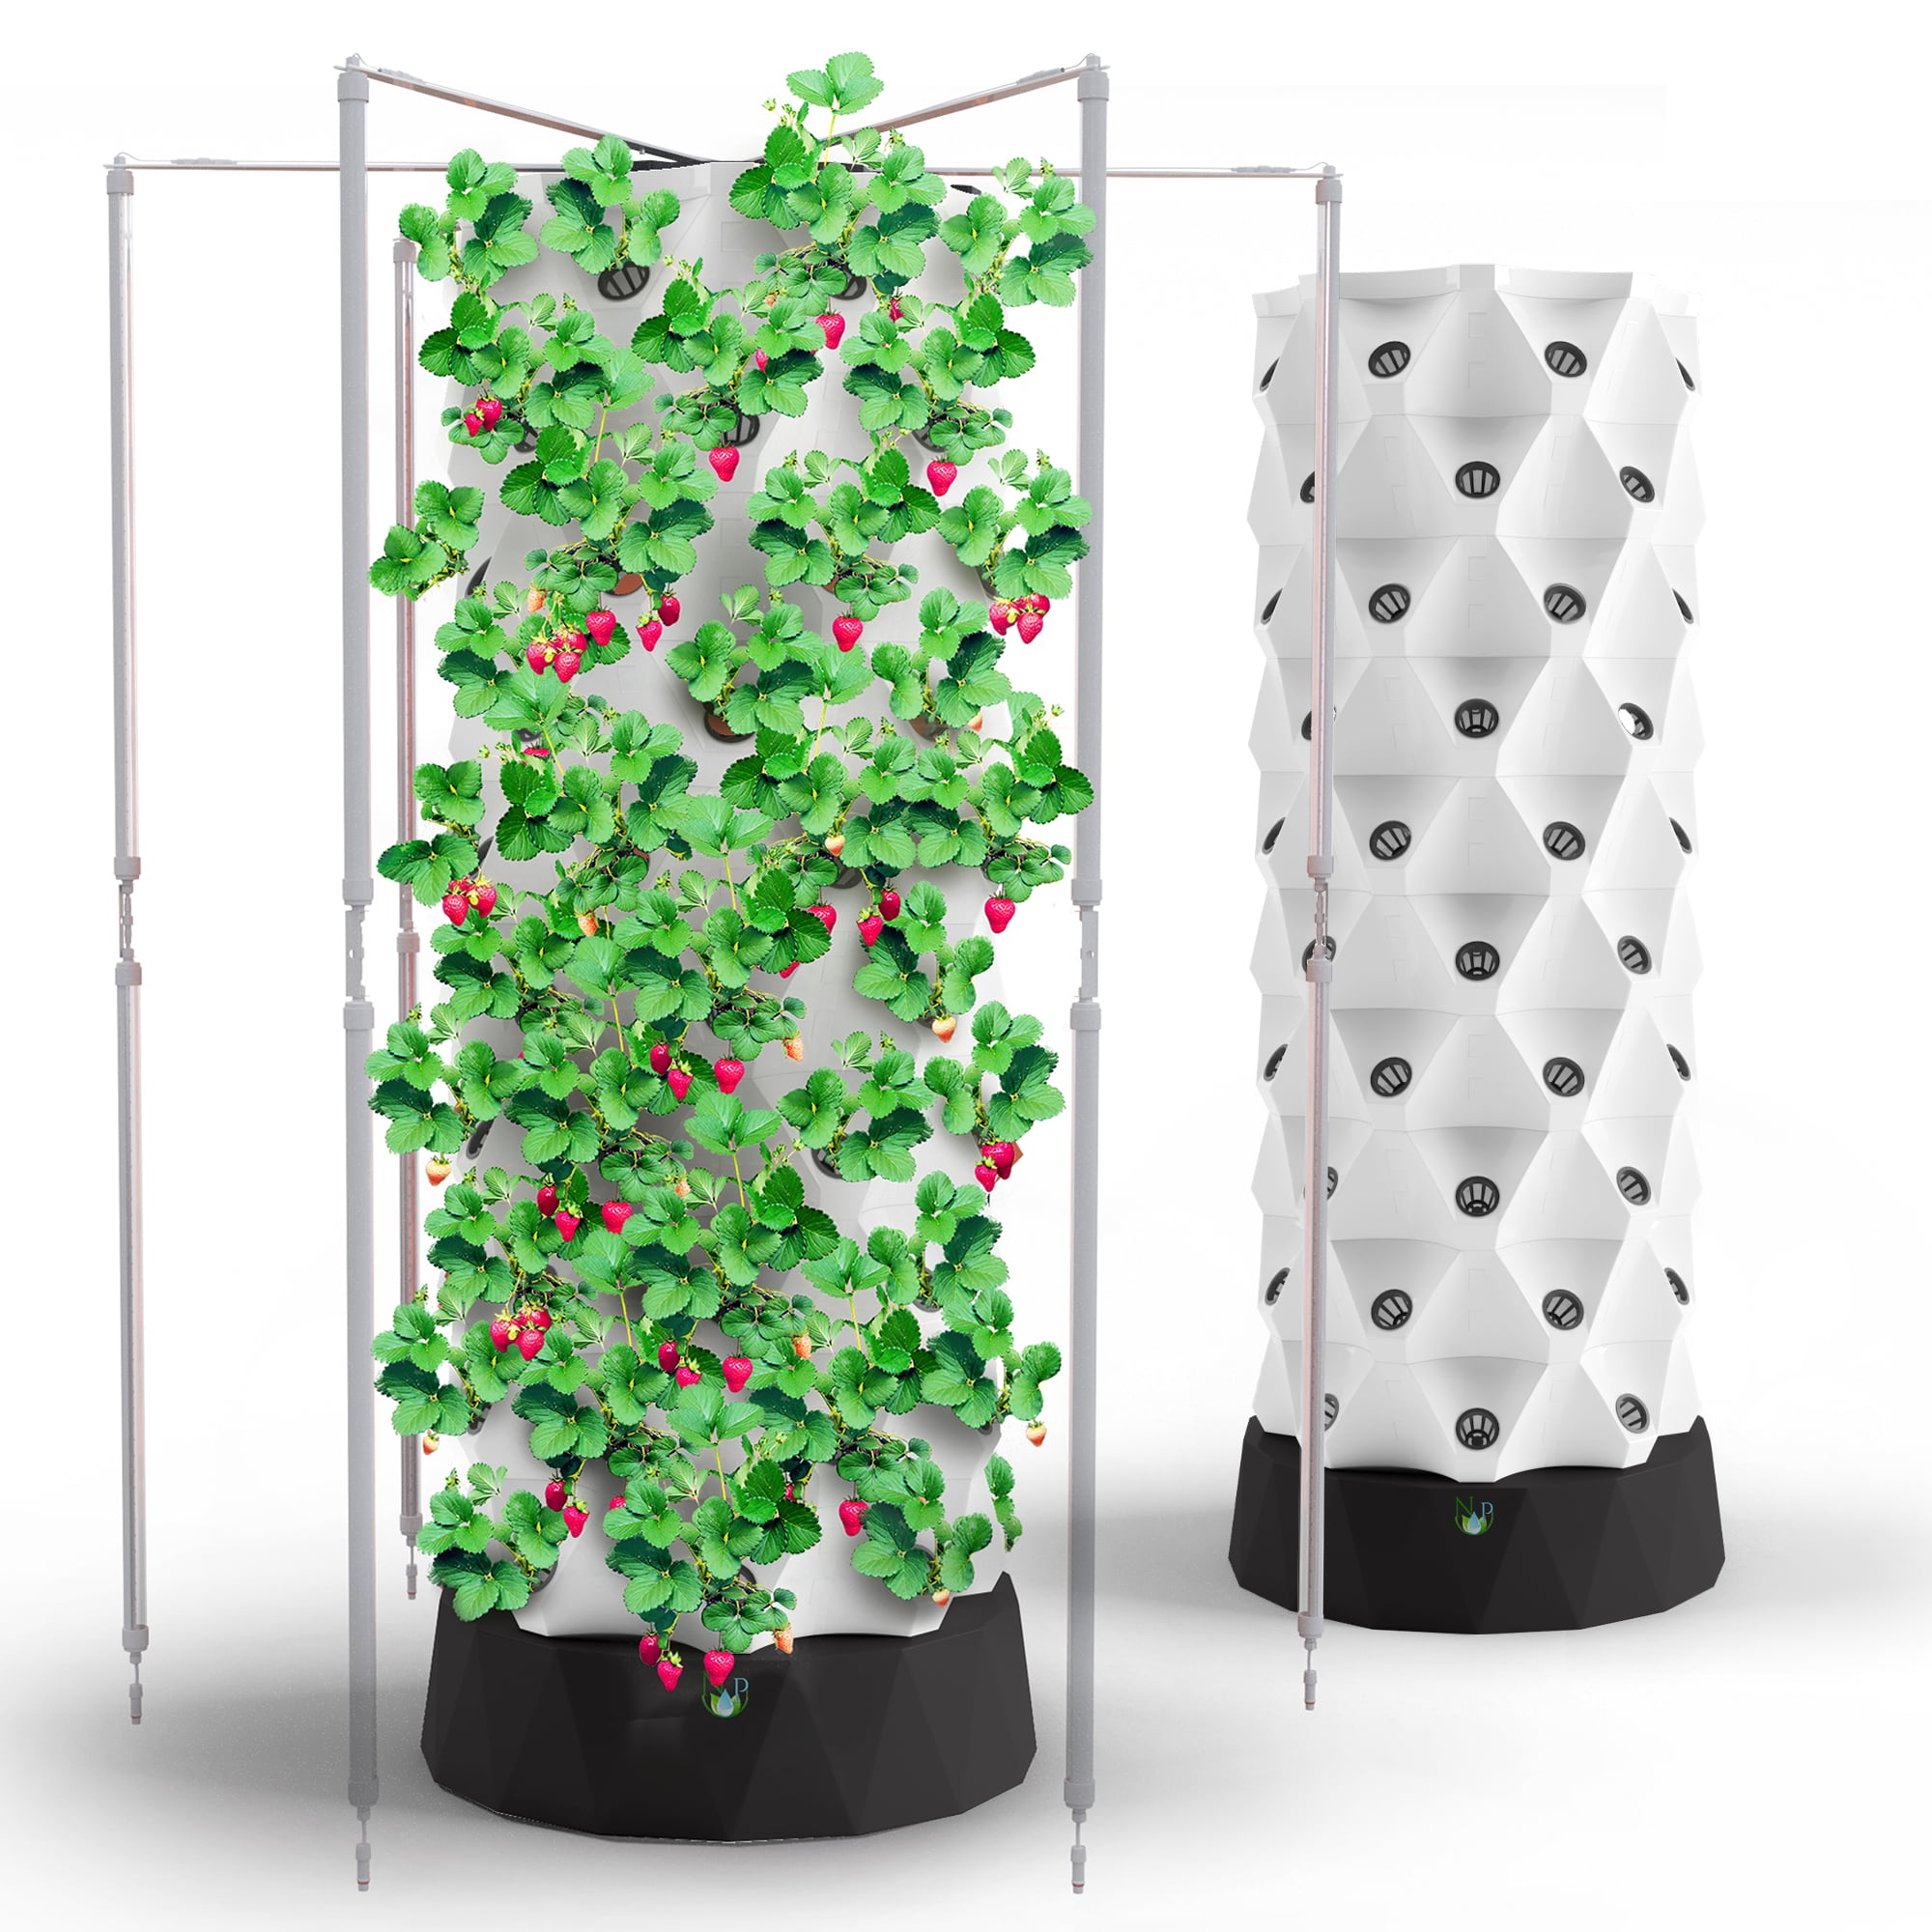 Hydroponics Growing System Vertical